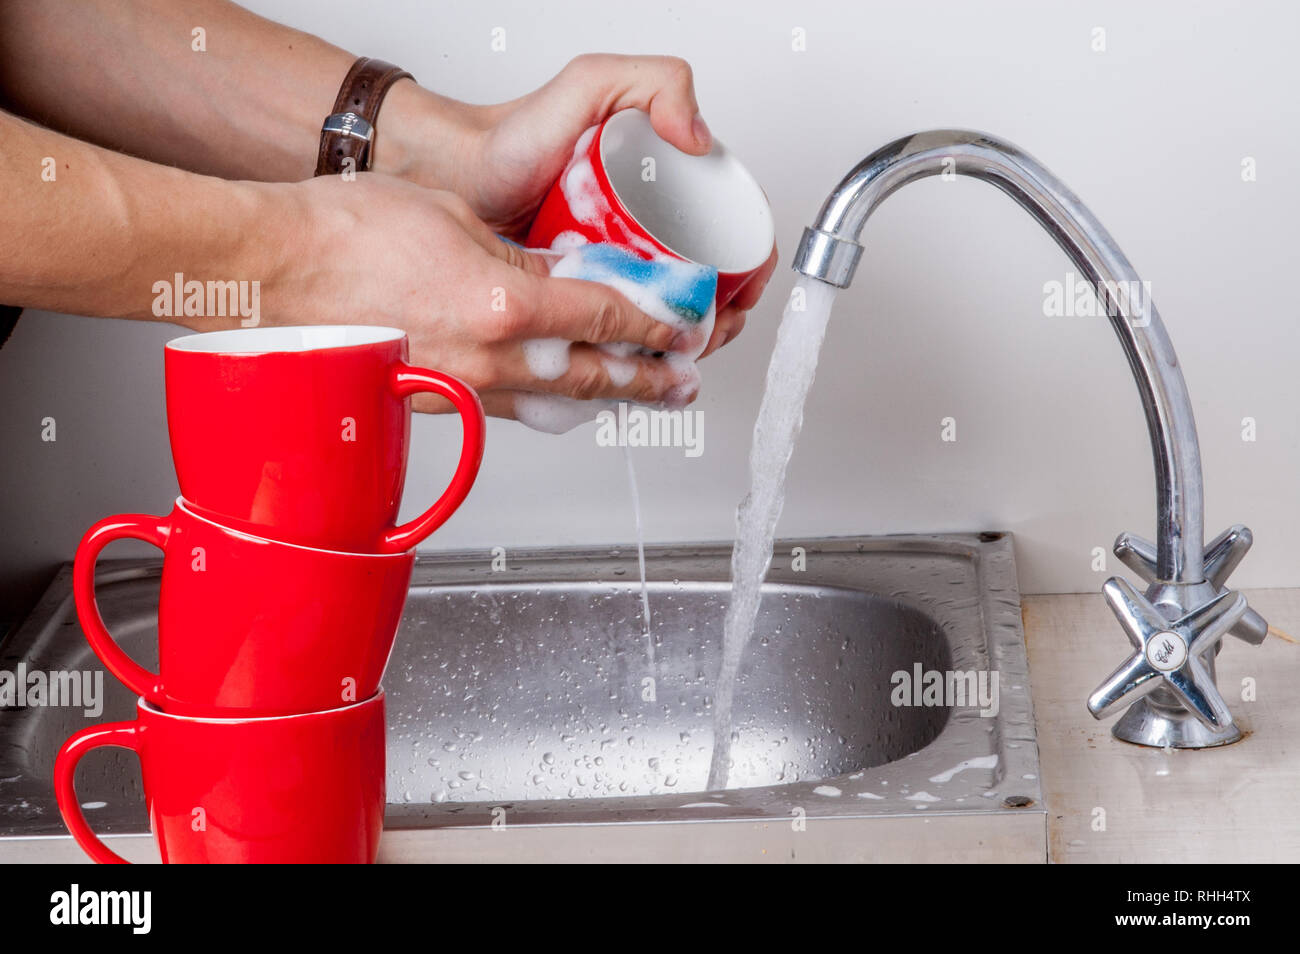 Male hands are washing red cups with sponge under running water in the kitchen sink Stock Photo